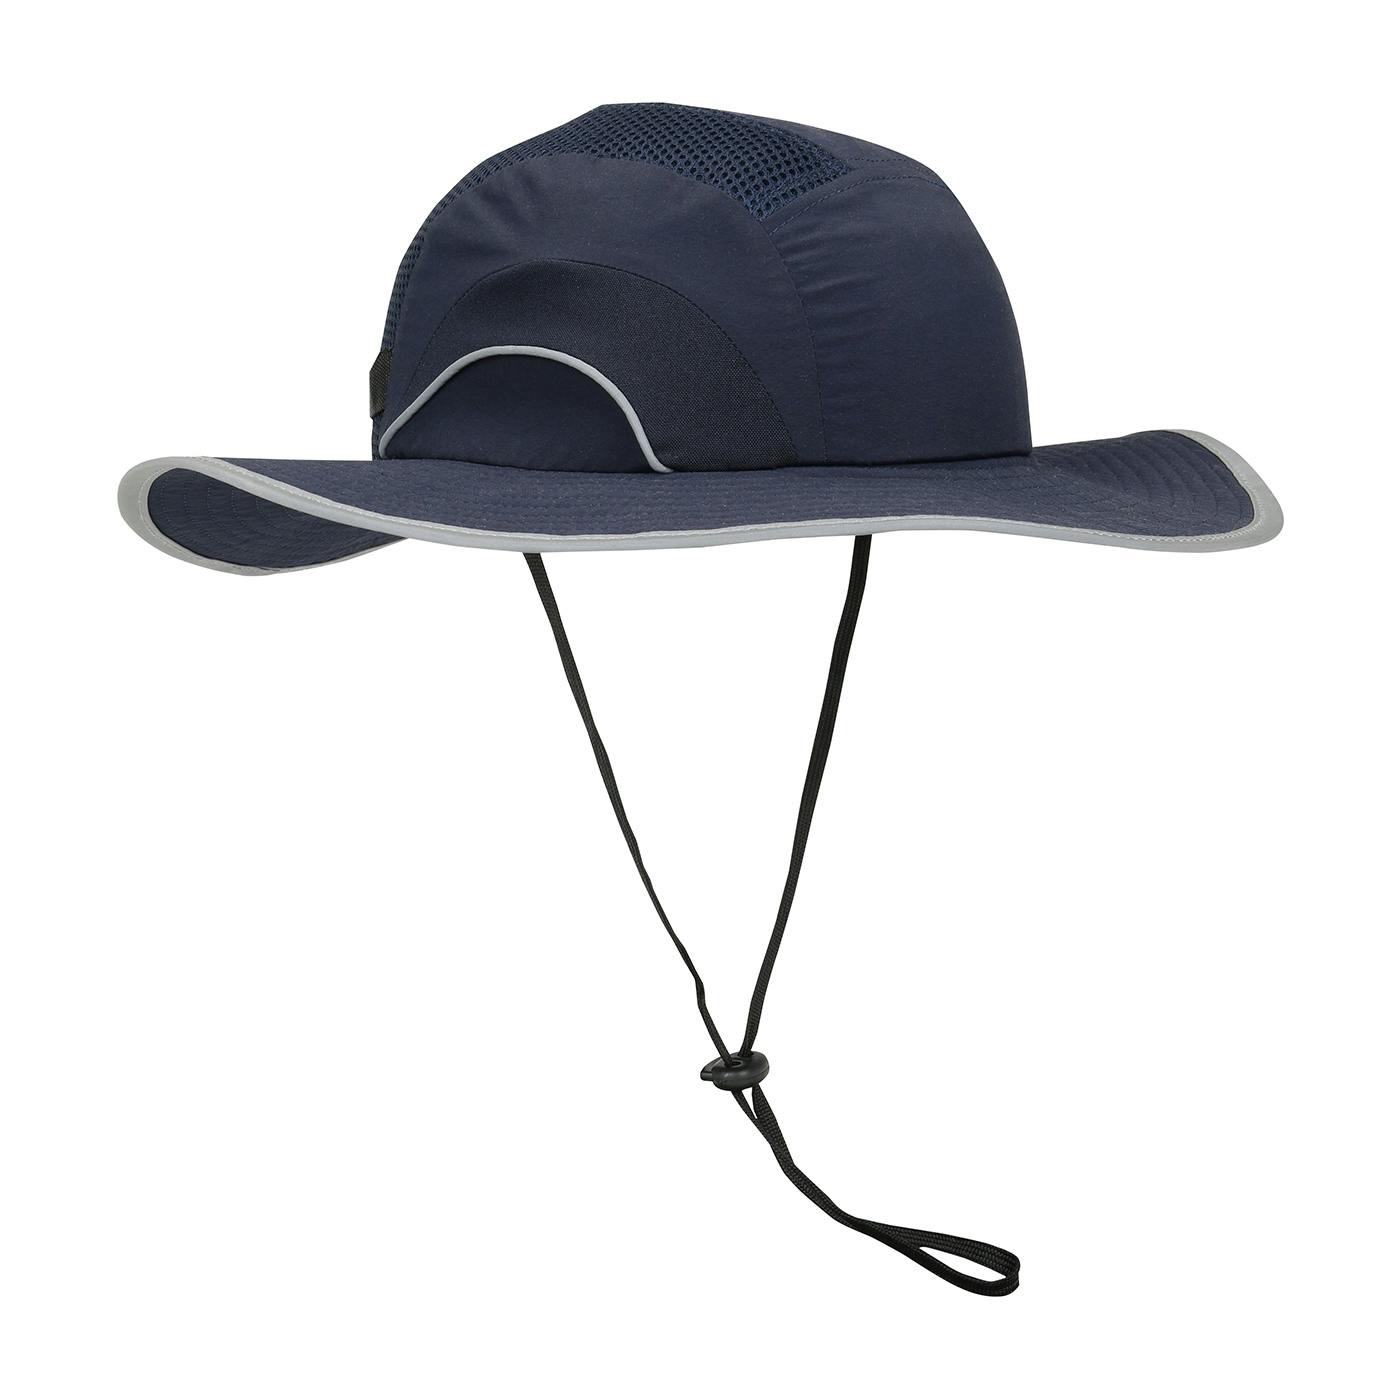 Ranger Style Bump Cap with HDPE Protective Liner, Adjustable Back and Chin Strap, Navy (282-AFB375-21) - OS_1